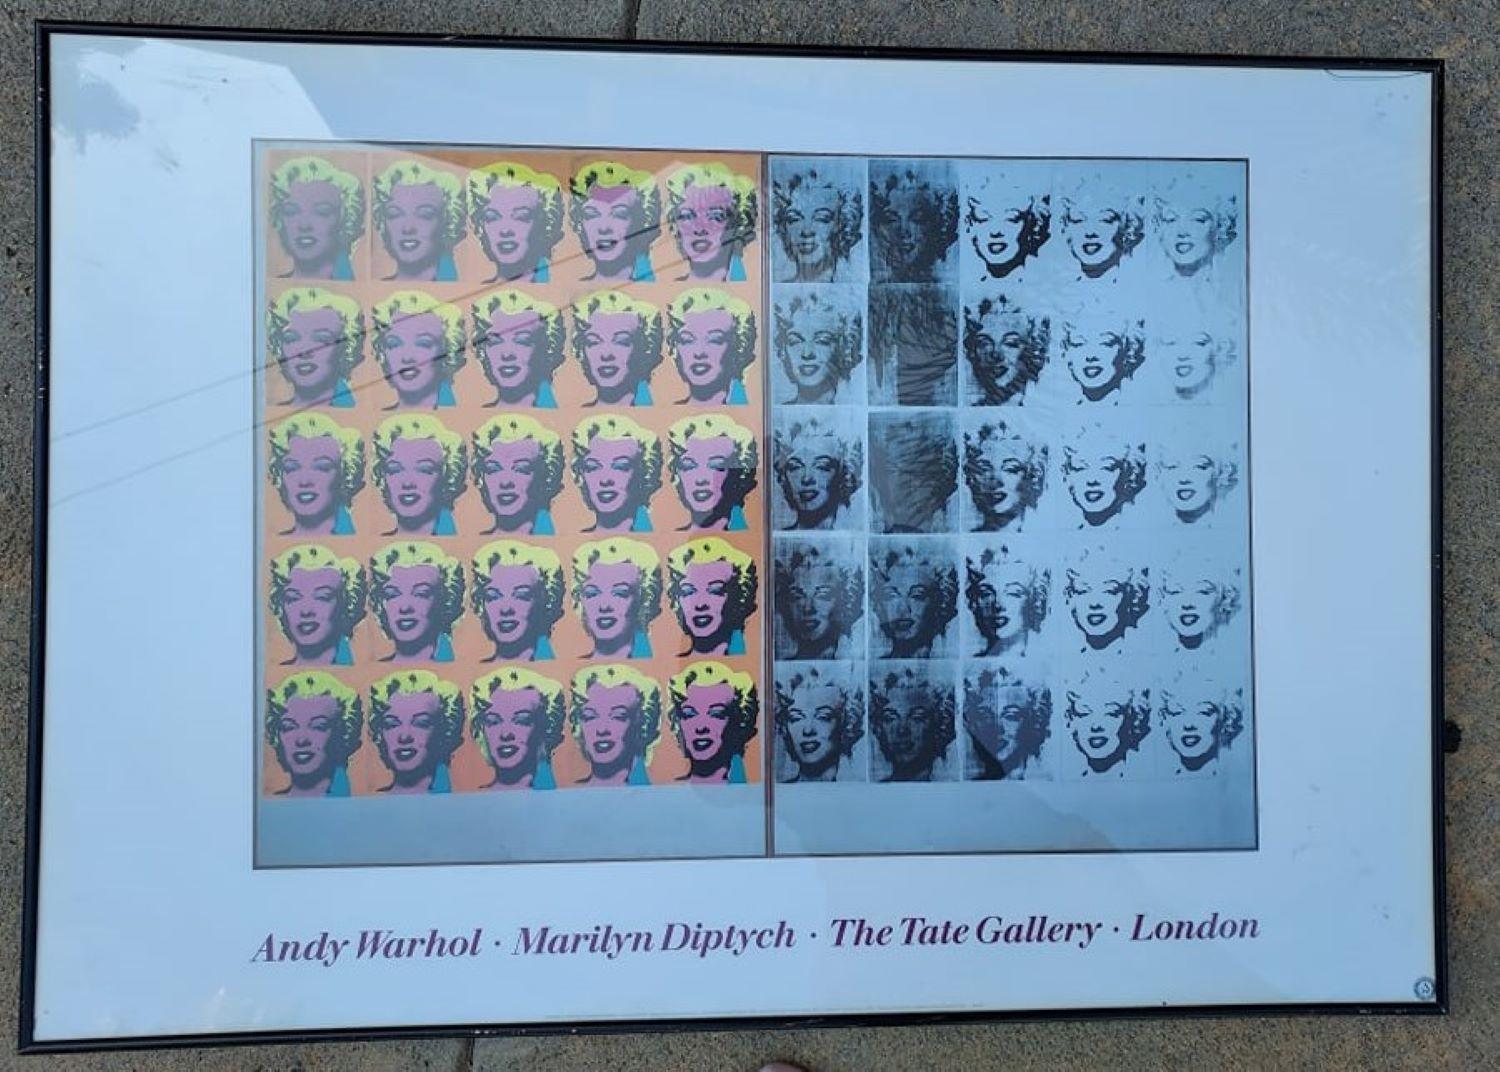 MARILYN DIPTYCH  AFTER ANDY WARHOL TATE GALLERY  - Print by (after) Andy Warhol